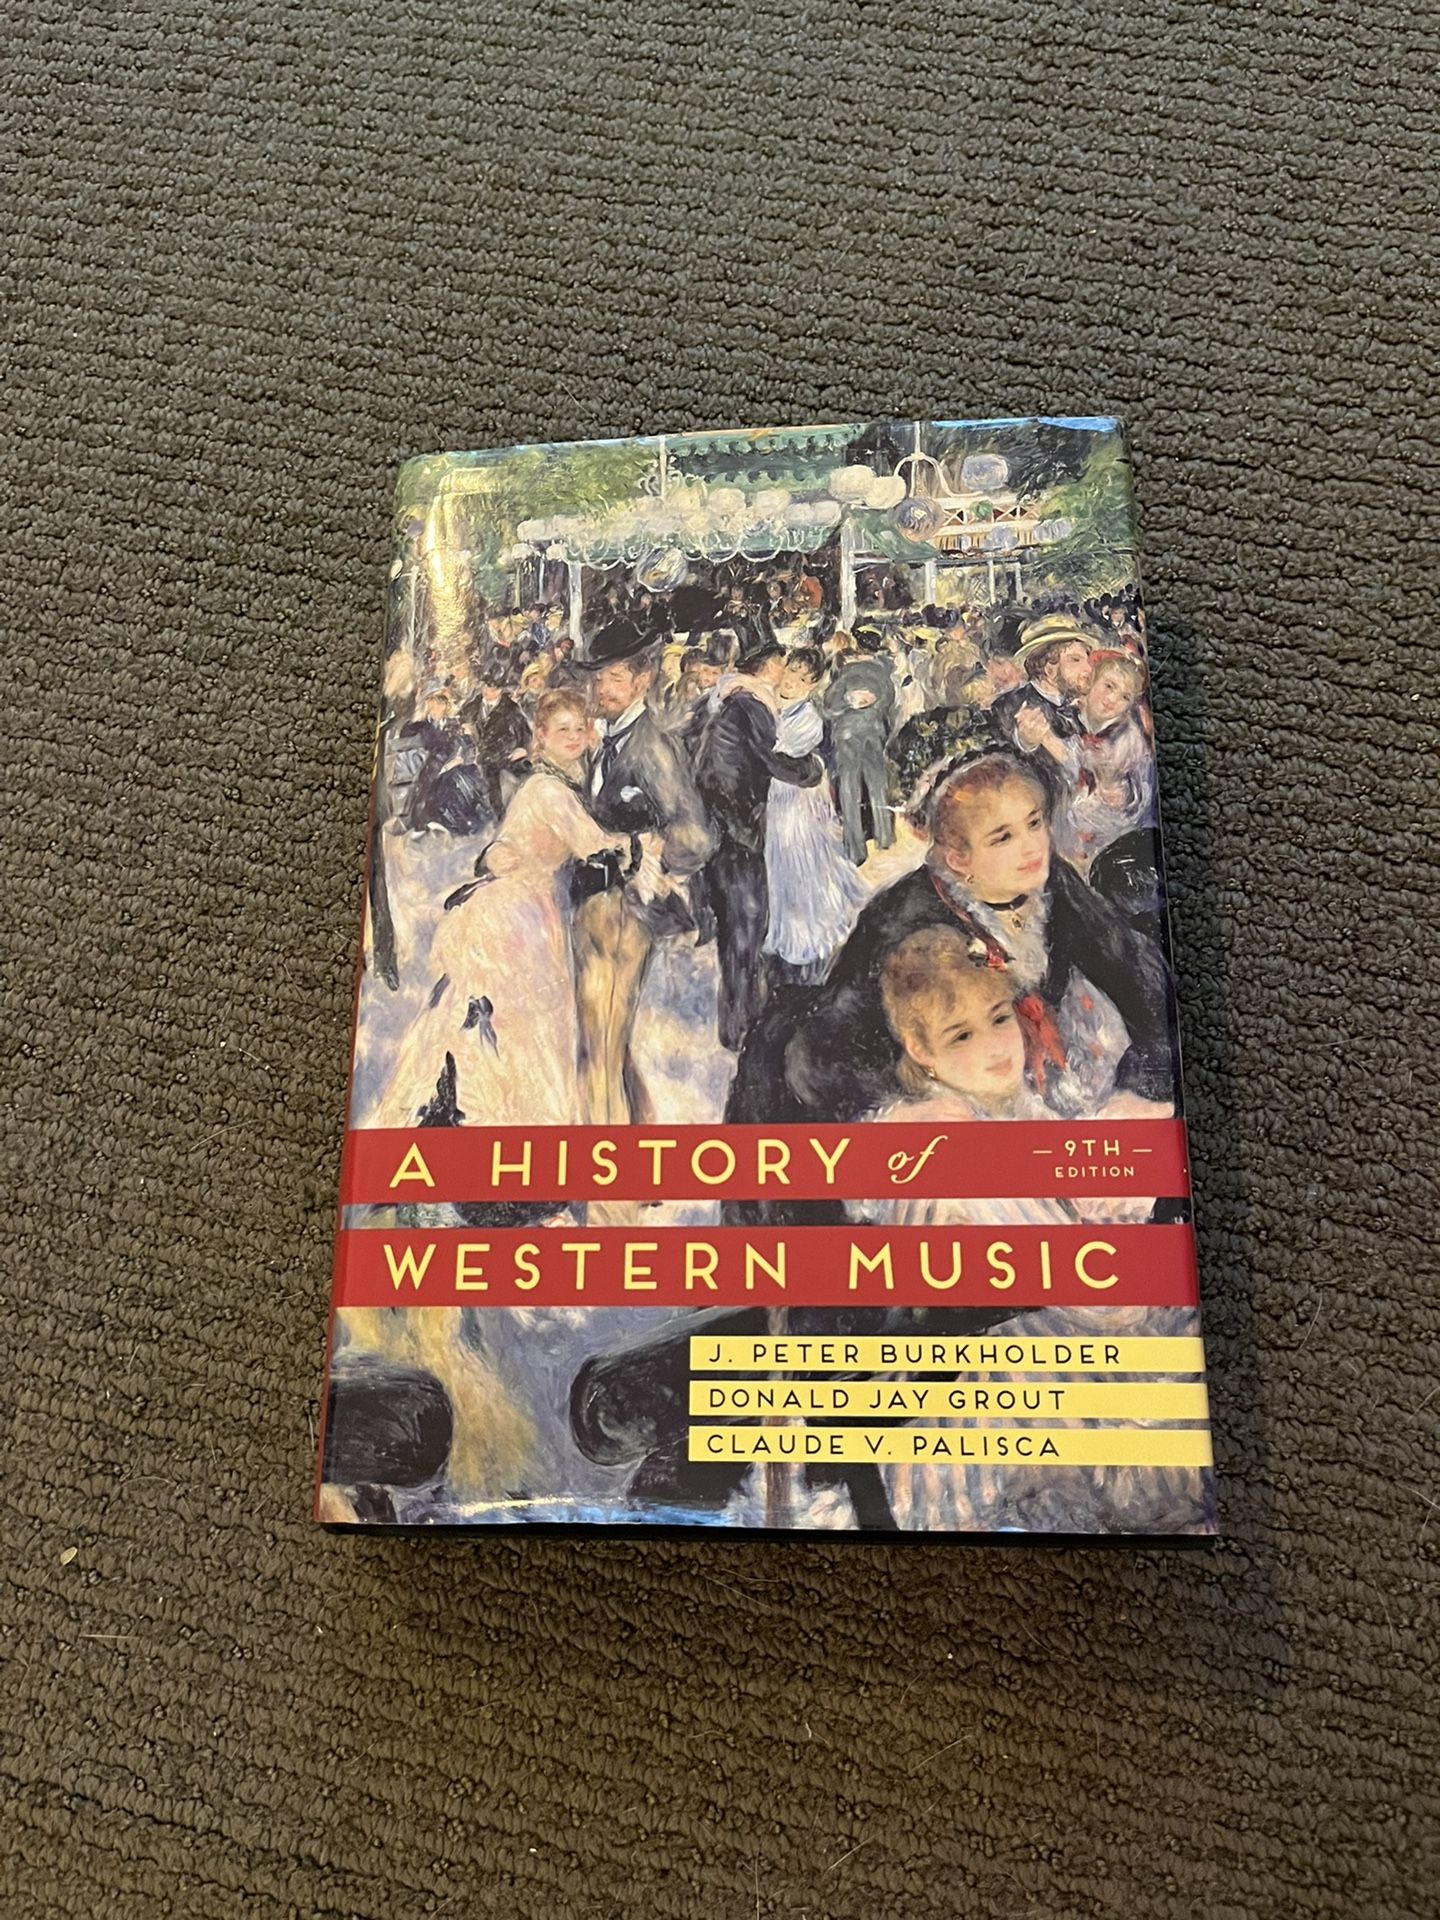 A History Of Western Music 9th Edition by J. Peter Burkholder